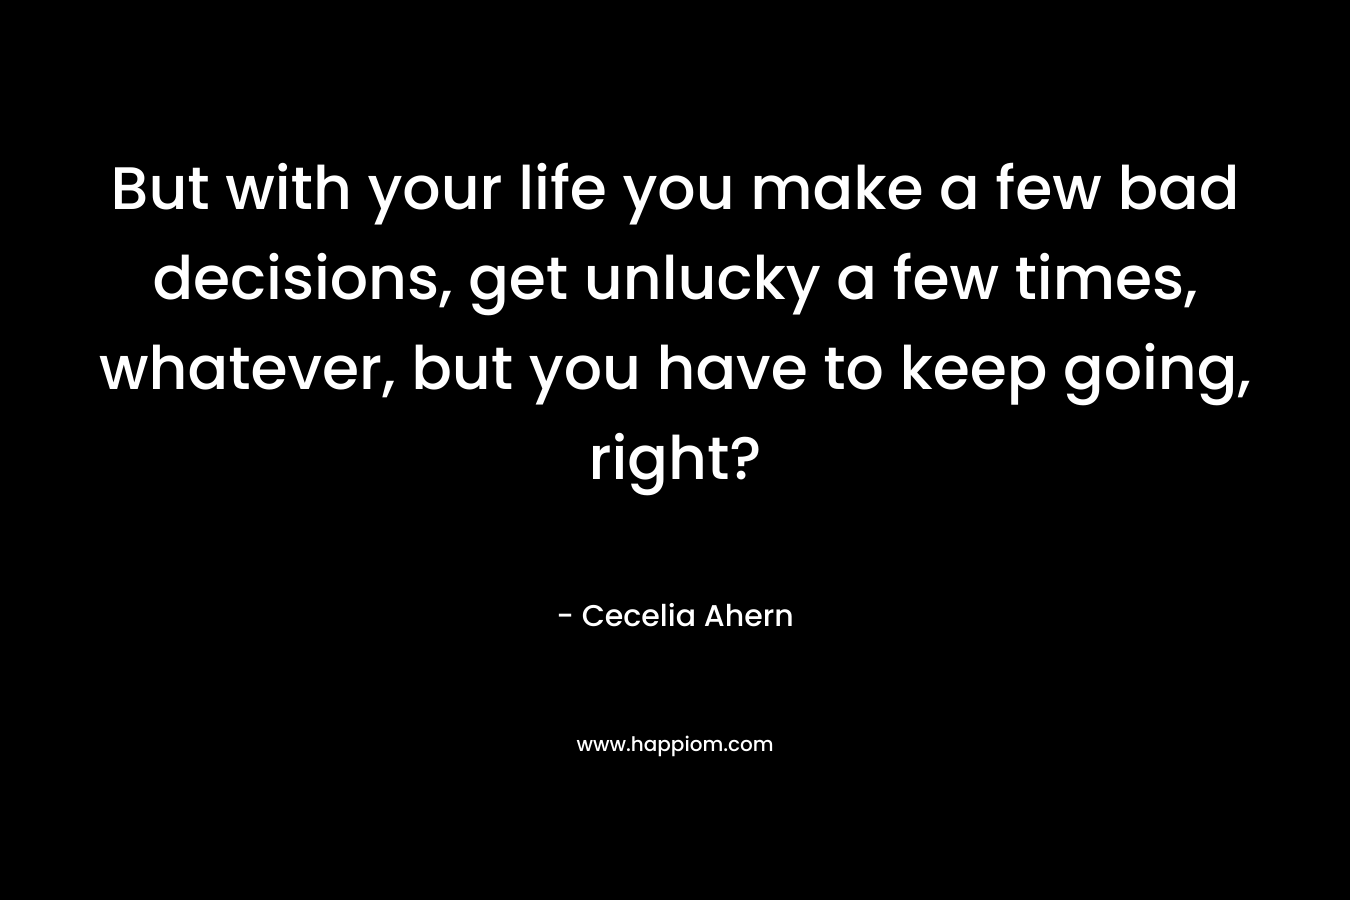 But with your life you make a few bad decisions, get unlucky a few times, whatever, but you have to keep going, right? – Cecelia Ahern